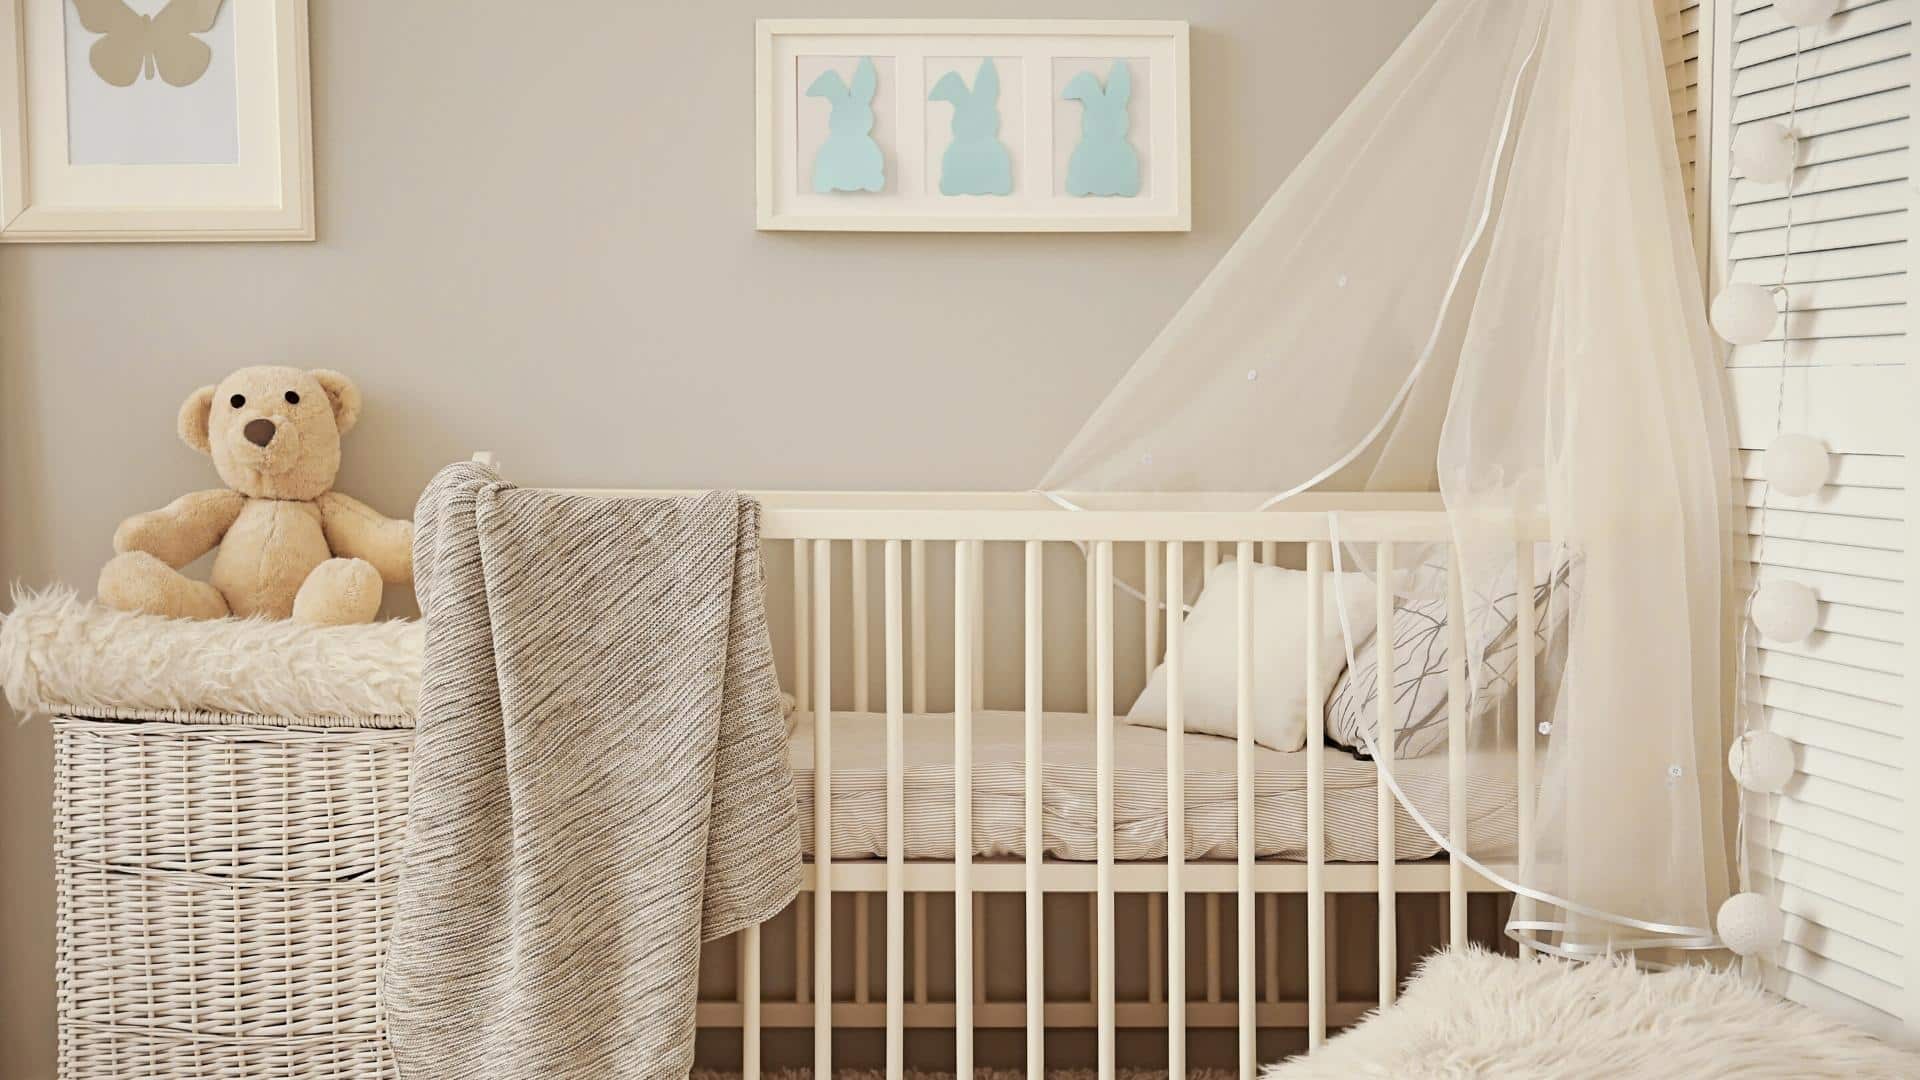 11 Month Old Sleep Schedule: The Essential Guide You NEED.